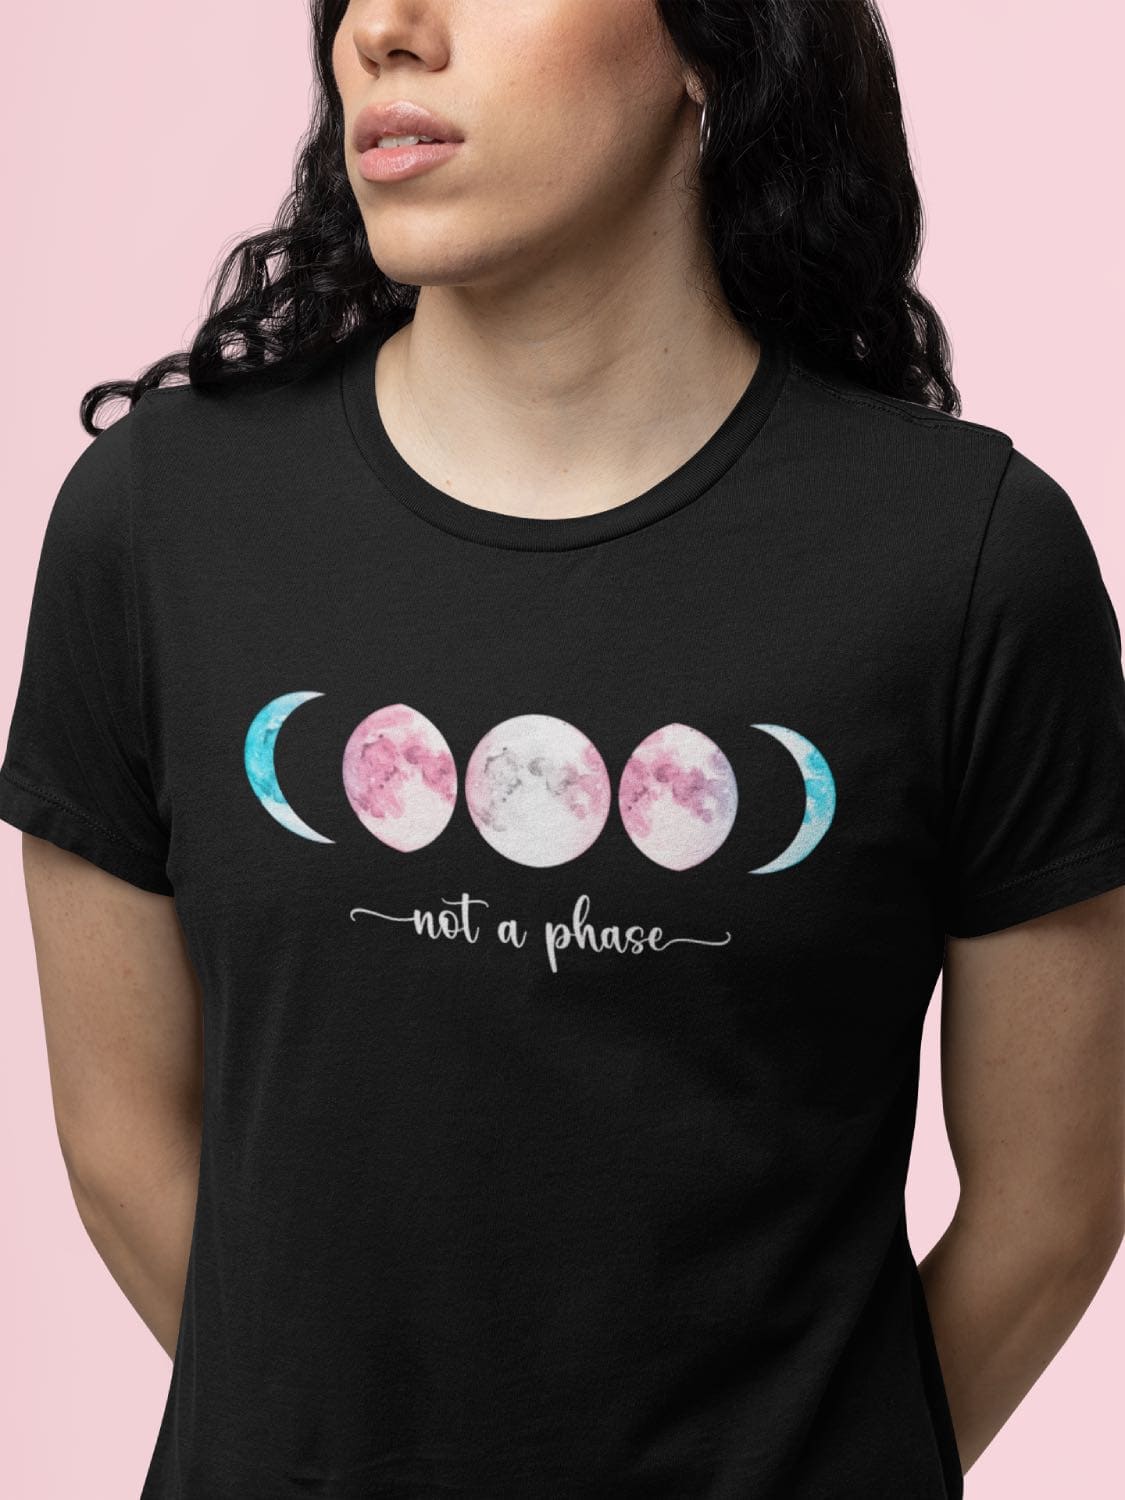 transgender shirt, not a phase moon phases, in use